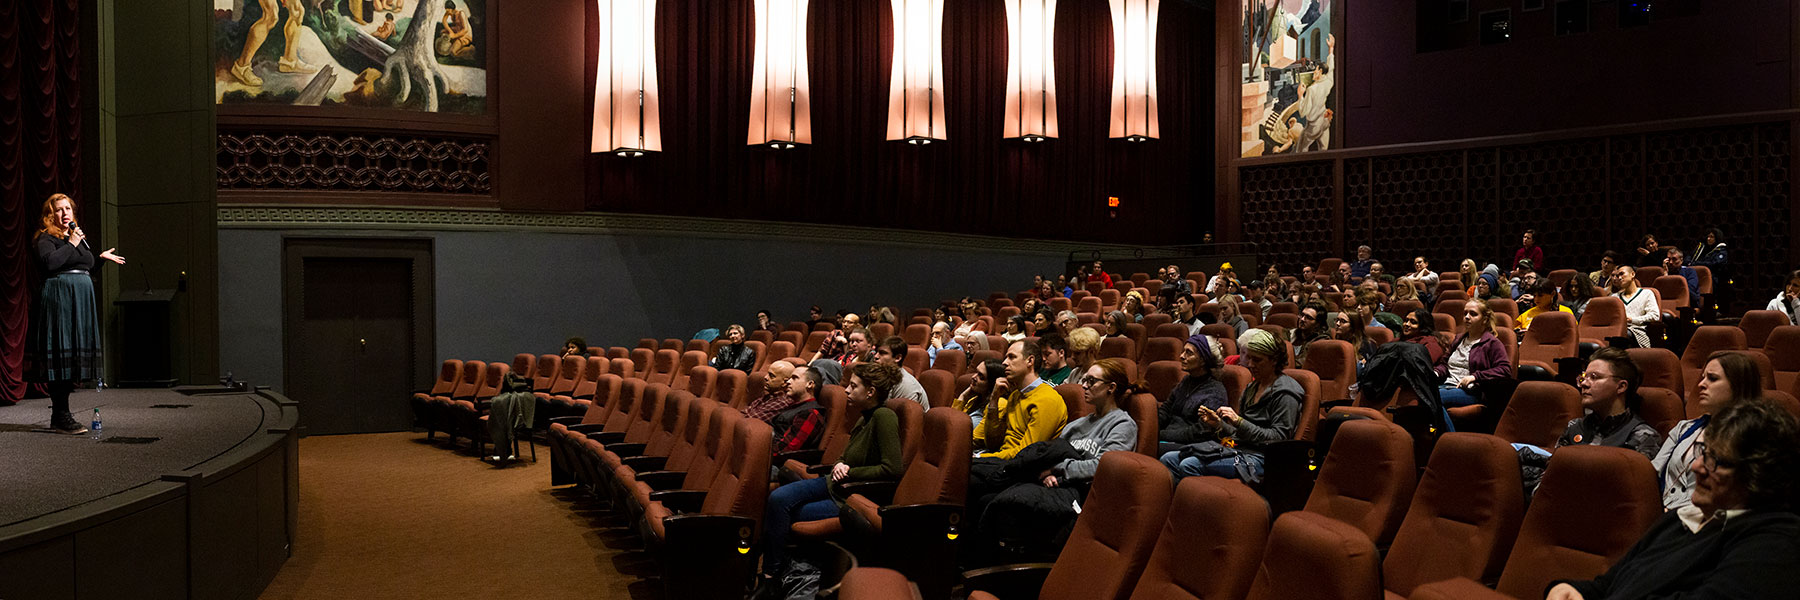 A film director speaking to an audience at IU Cinema.